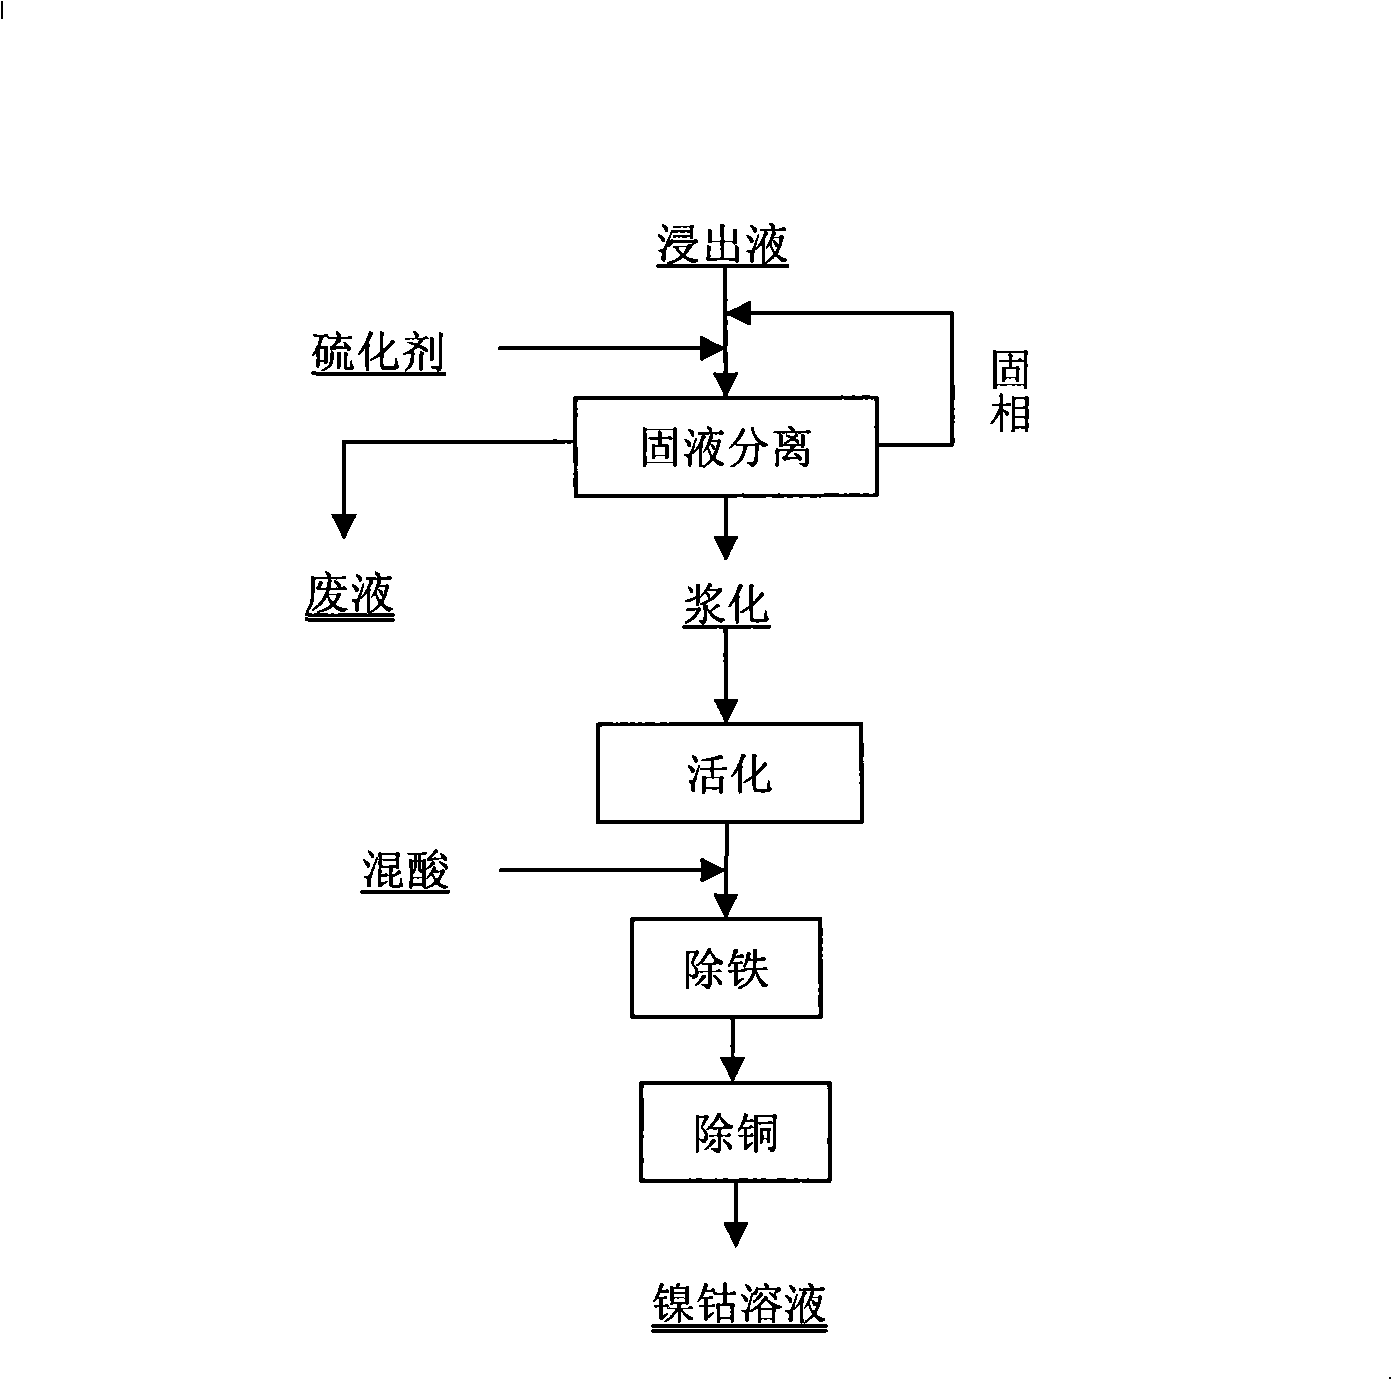 Method for collecting nickel and cobalt from laterite-nickel ore lixivium